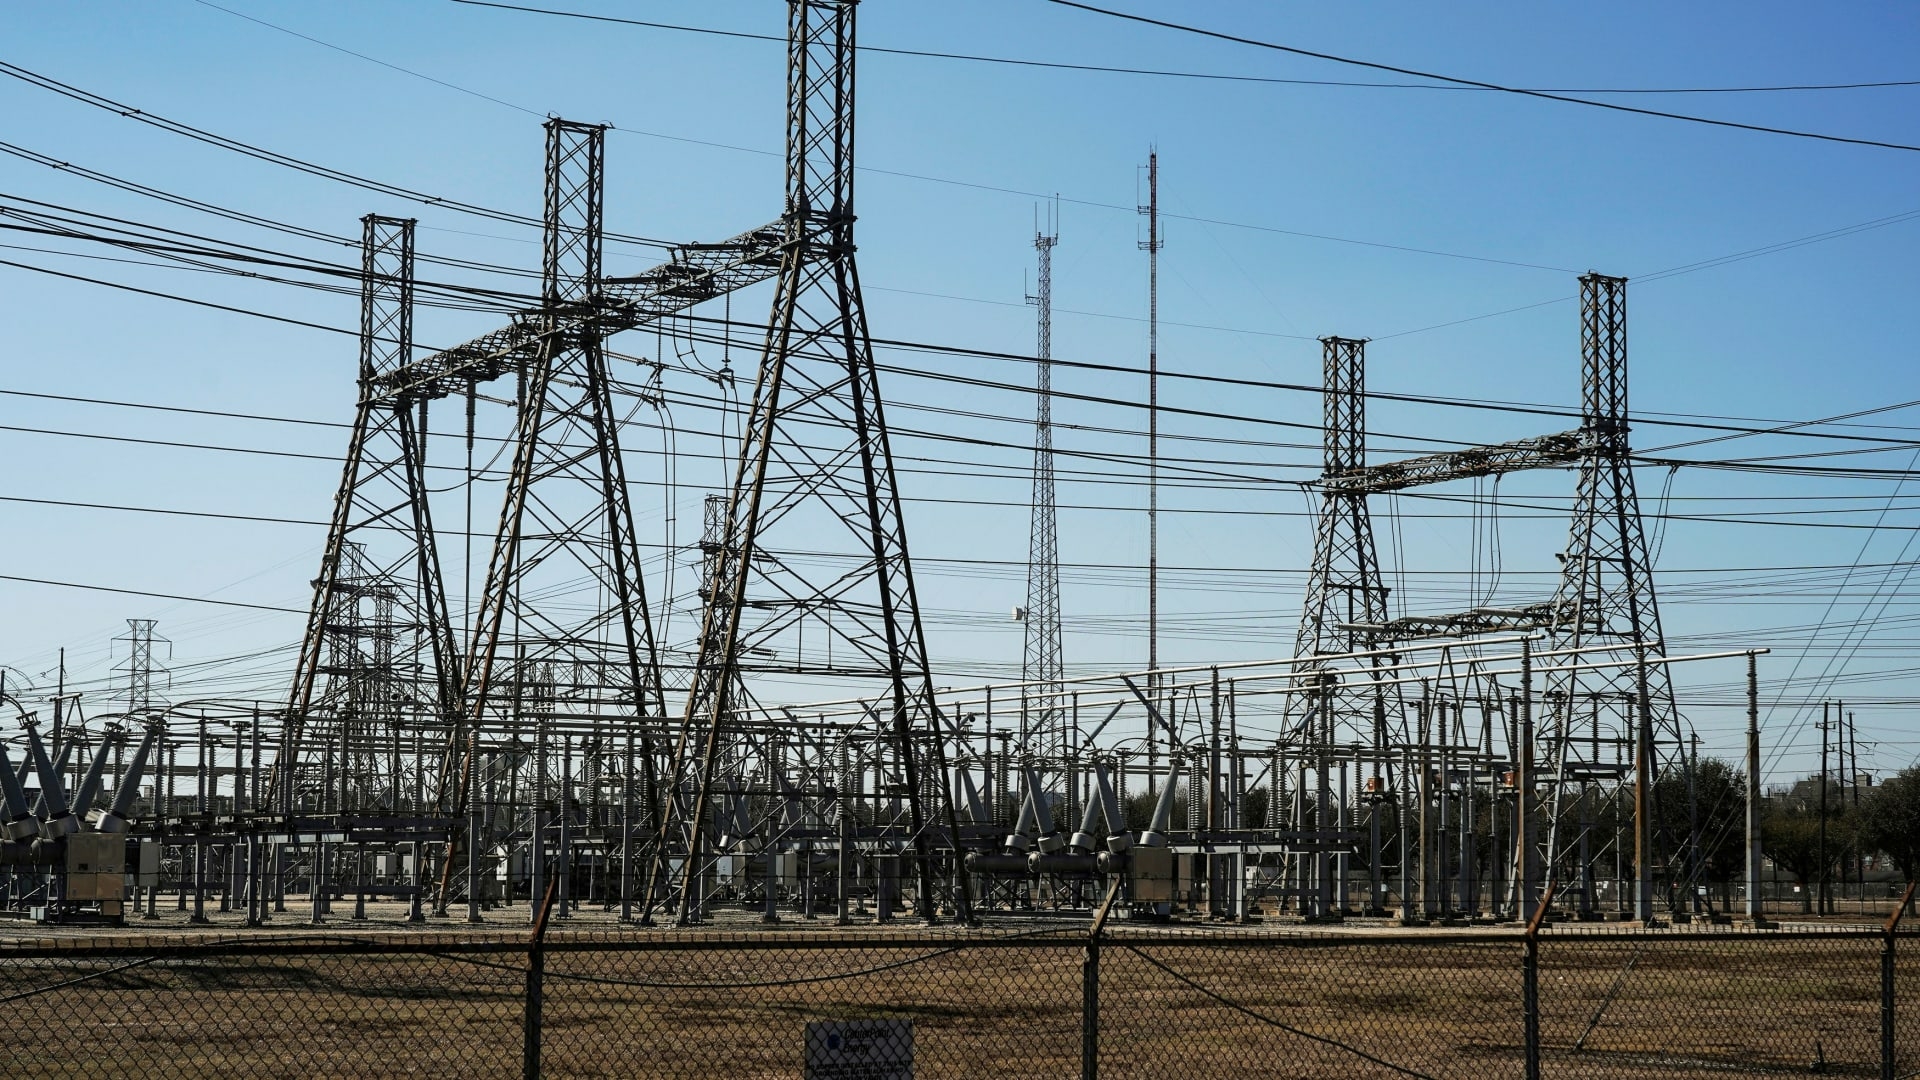 Why the US is struggling to modernize the electric grid